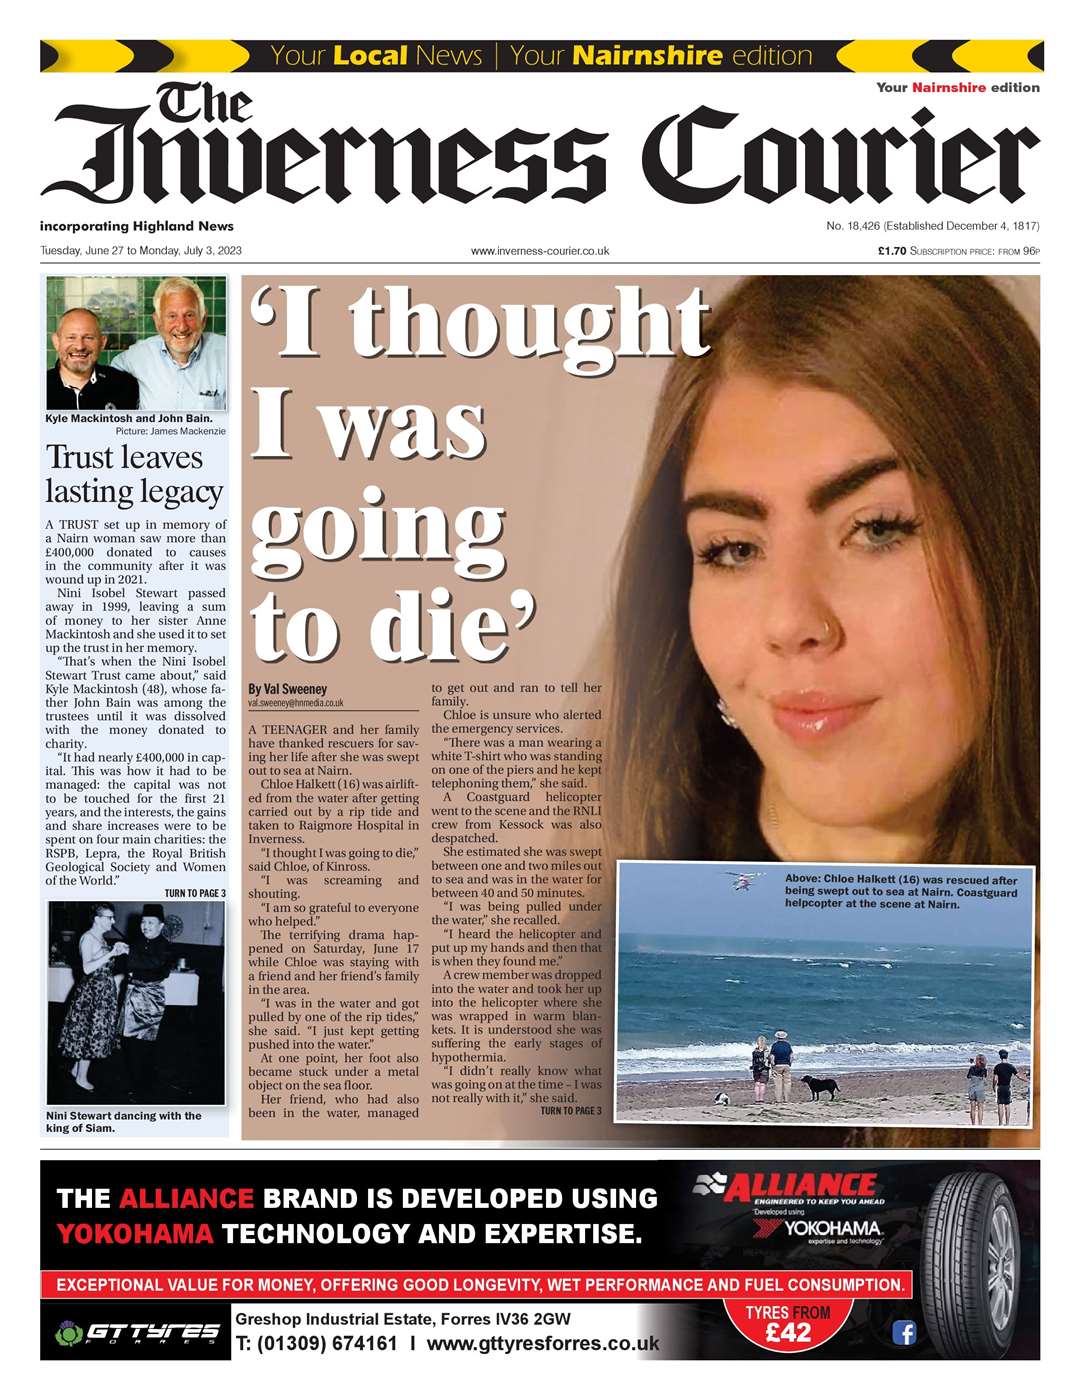 The Inverness Courier (Nairnshire edition), June 27, front page.